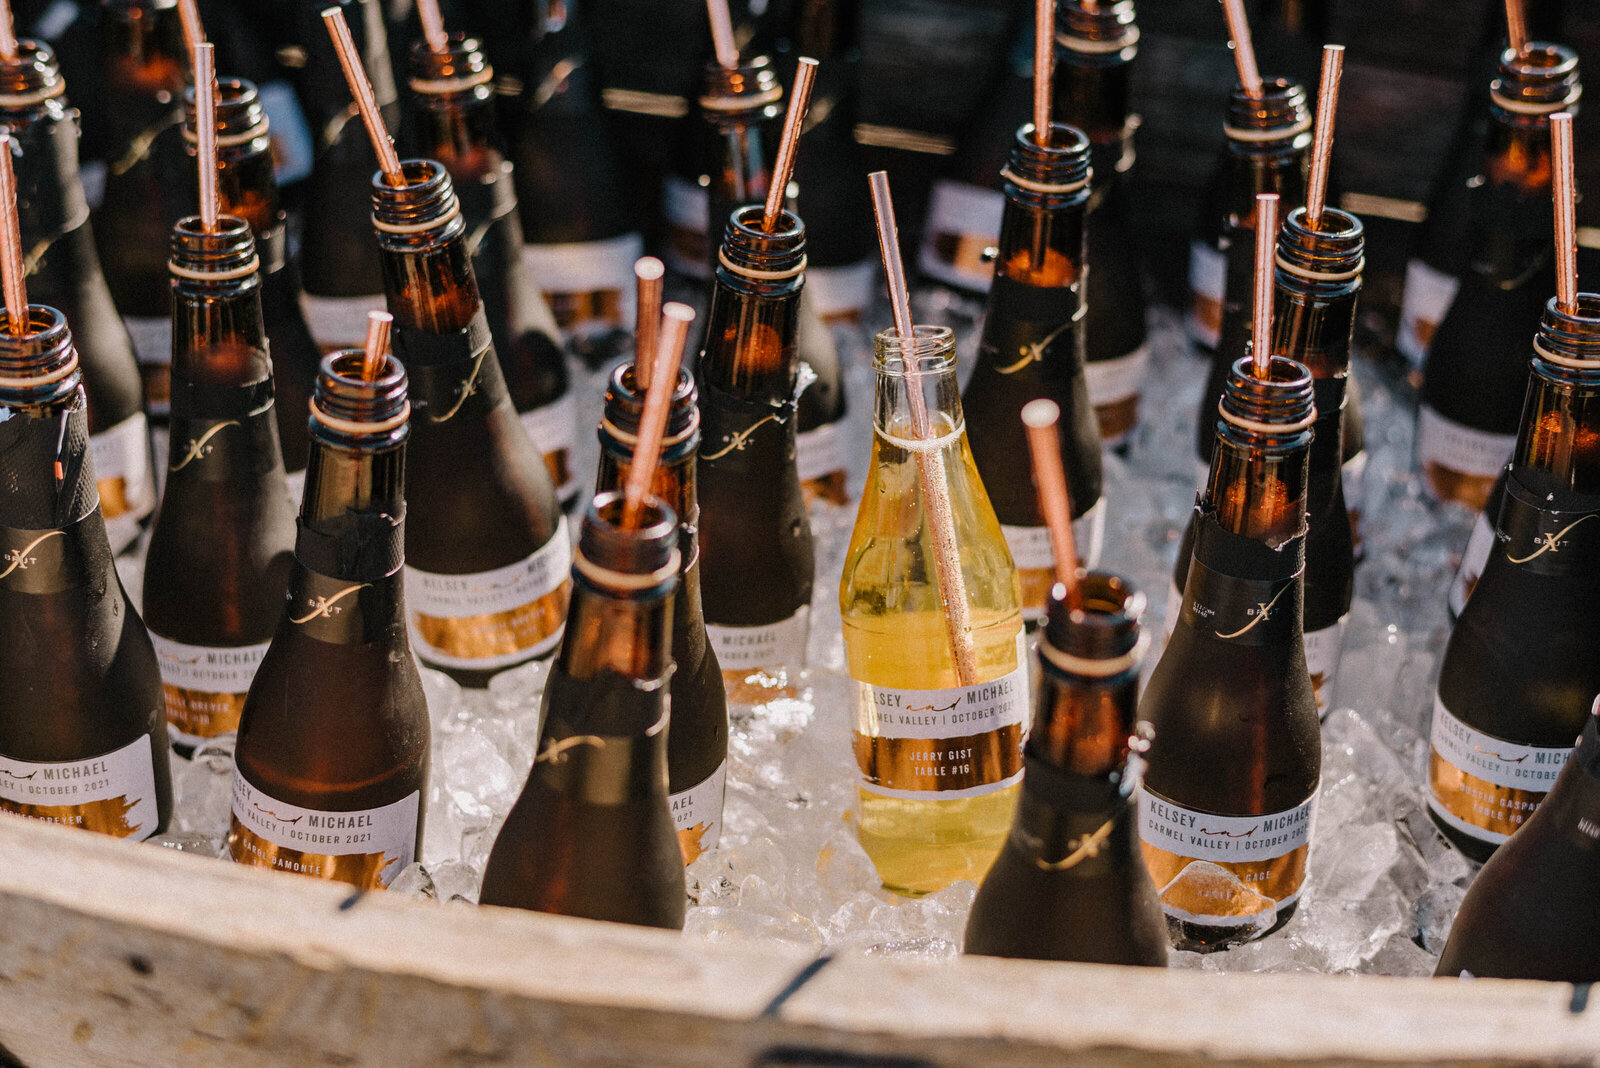 Mini bottles of champagne as escort cards at a wedding